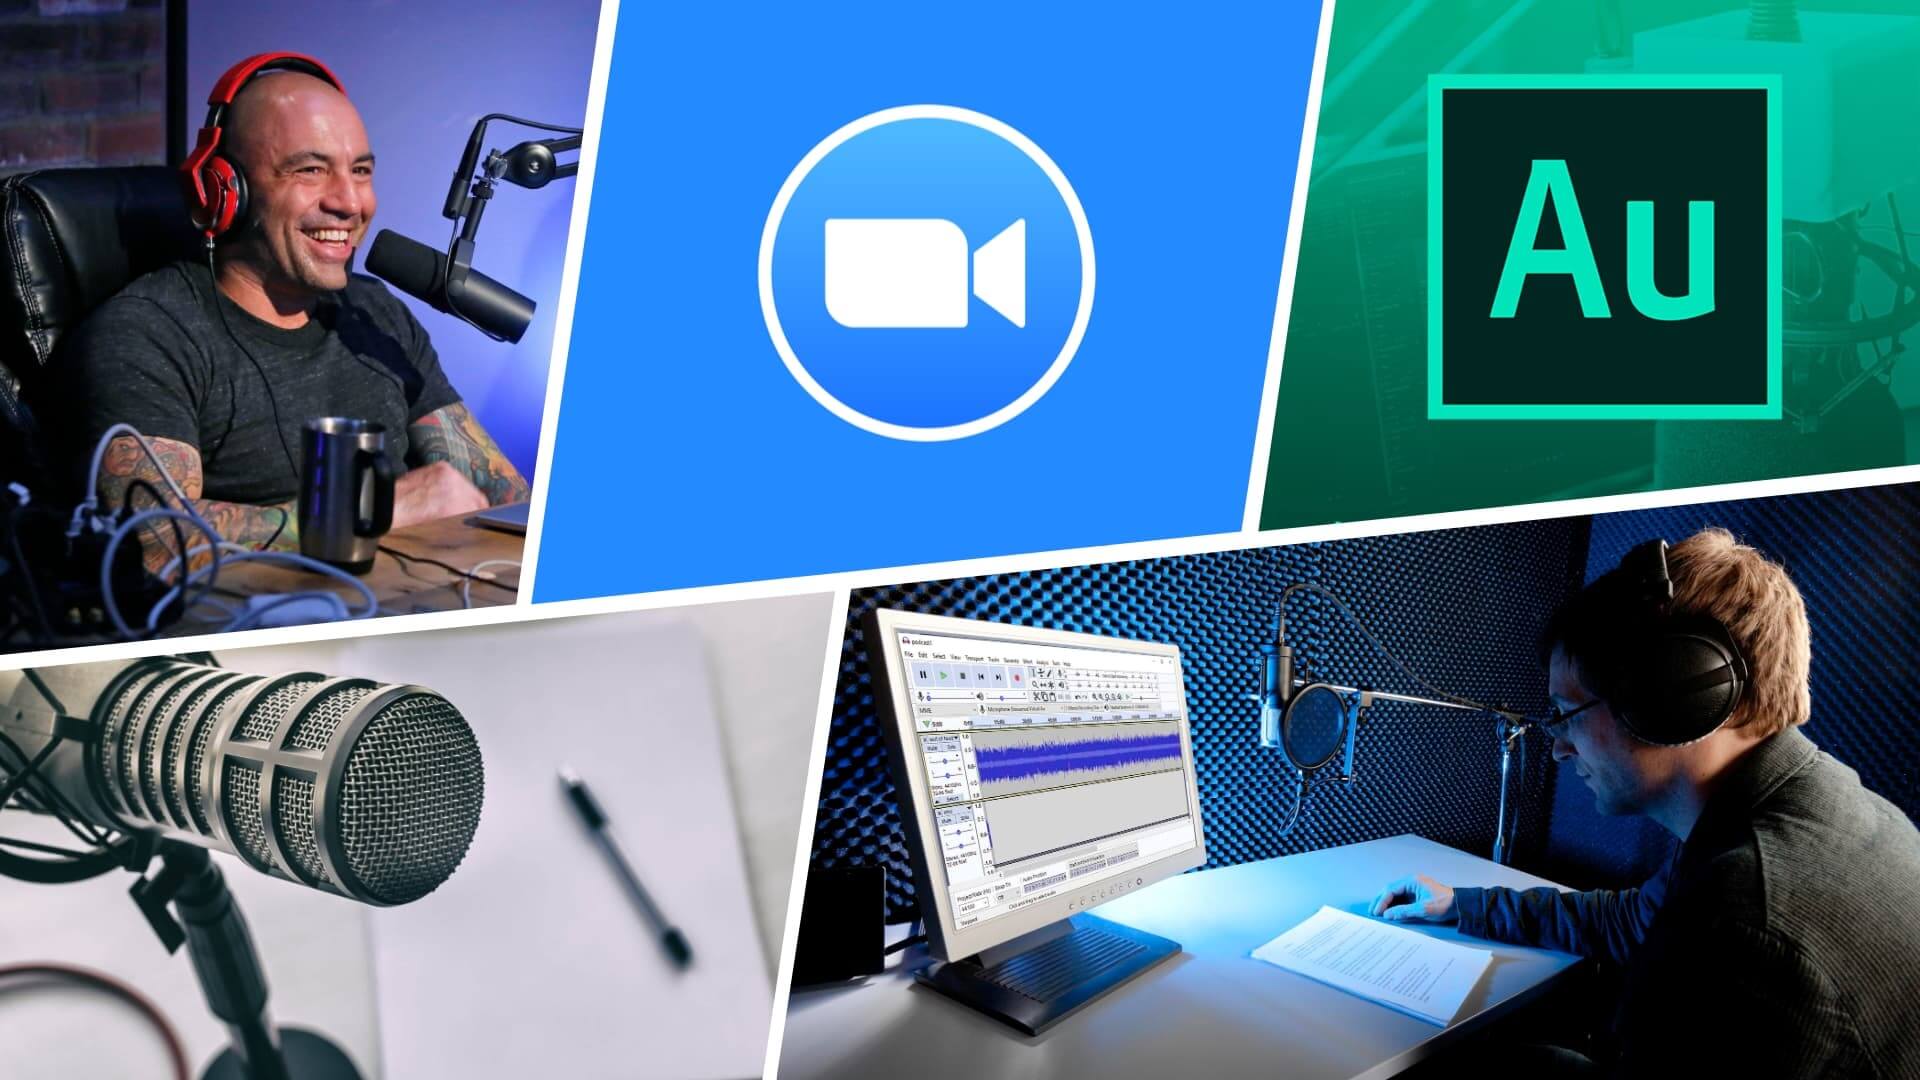 podcasting software for mac